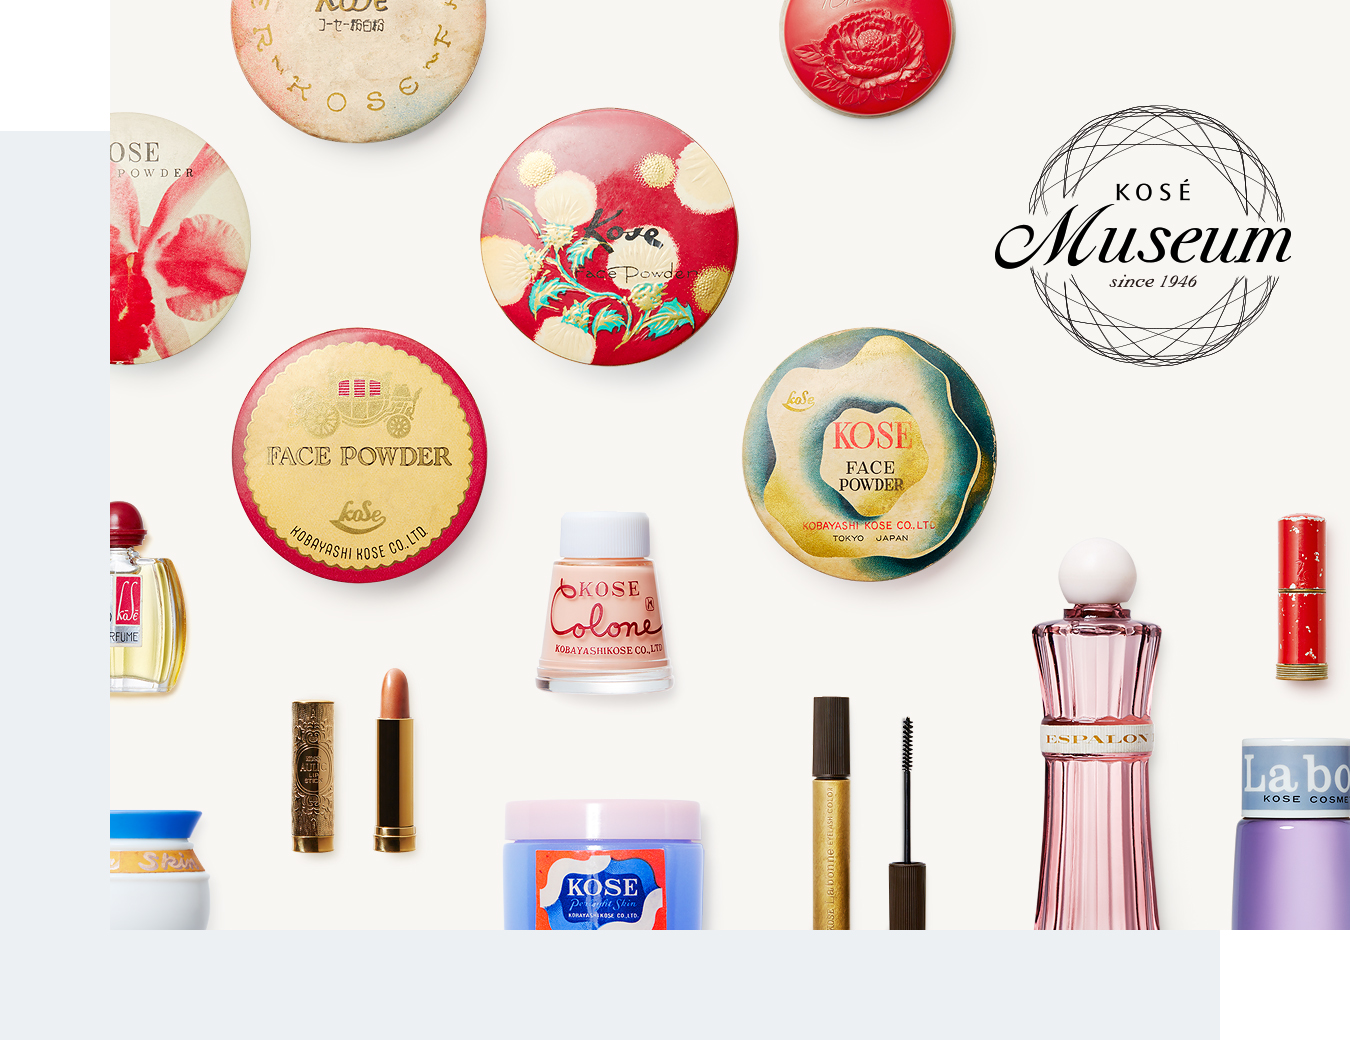 KOSÉ FY2022 Sales and Operating Profit Exceeded Expectations, Targeting the Chinese Market and Travel Retail Business